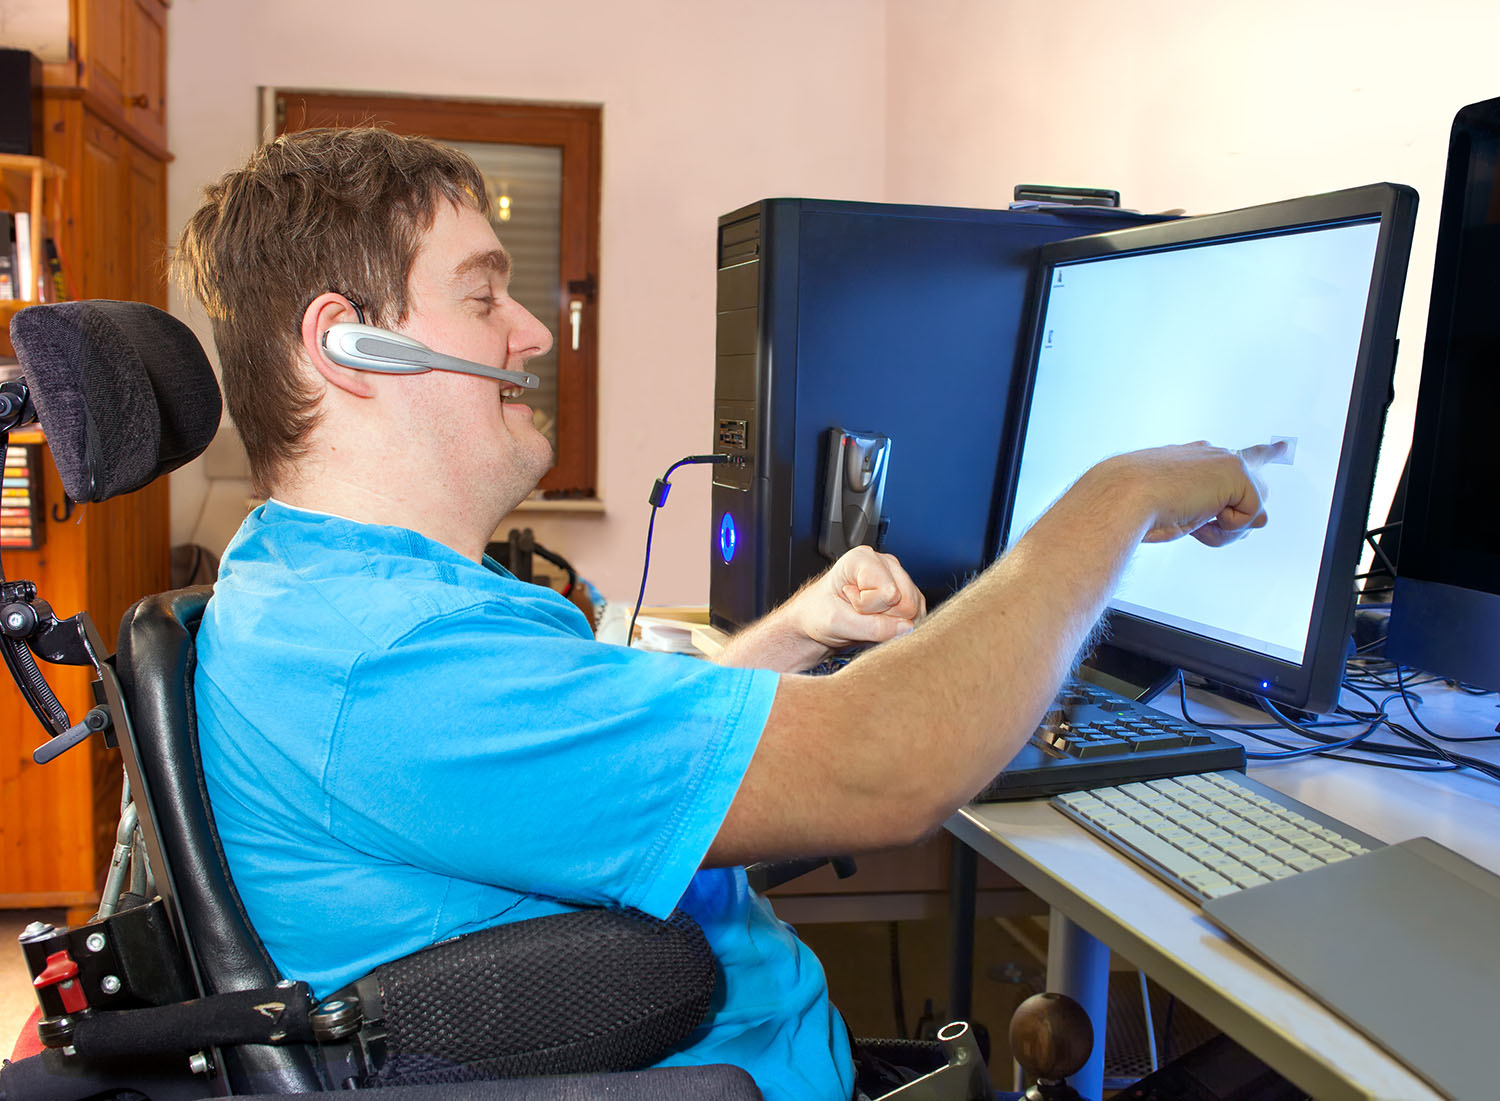 a young man with cerebral palsy sitting using touch screen computer